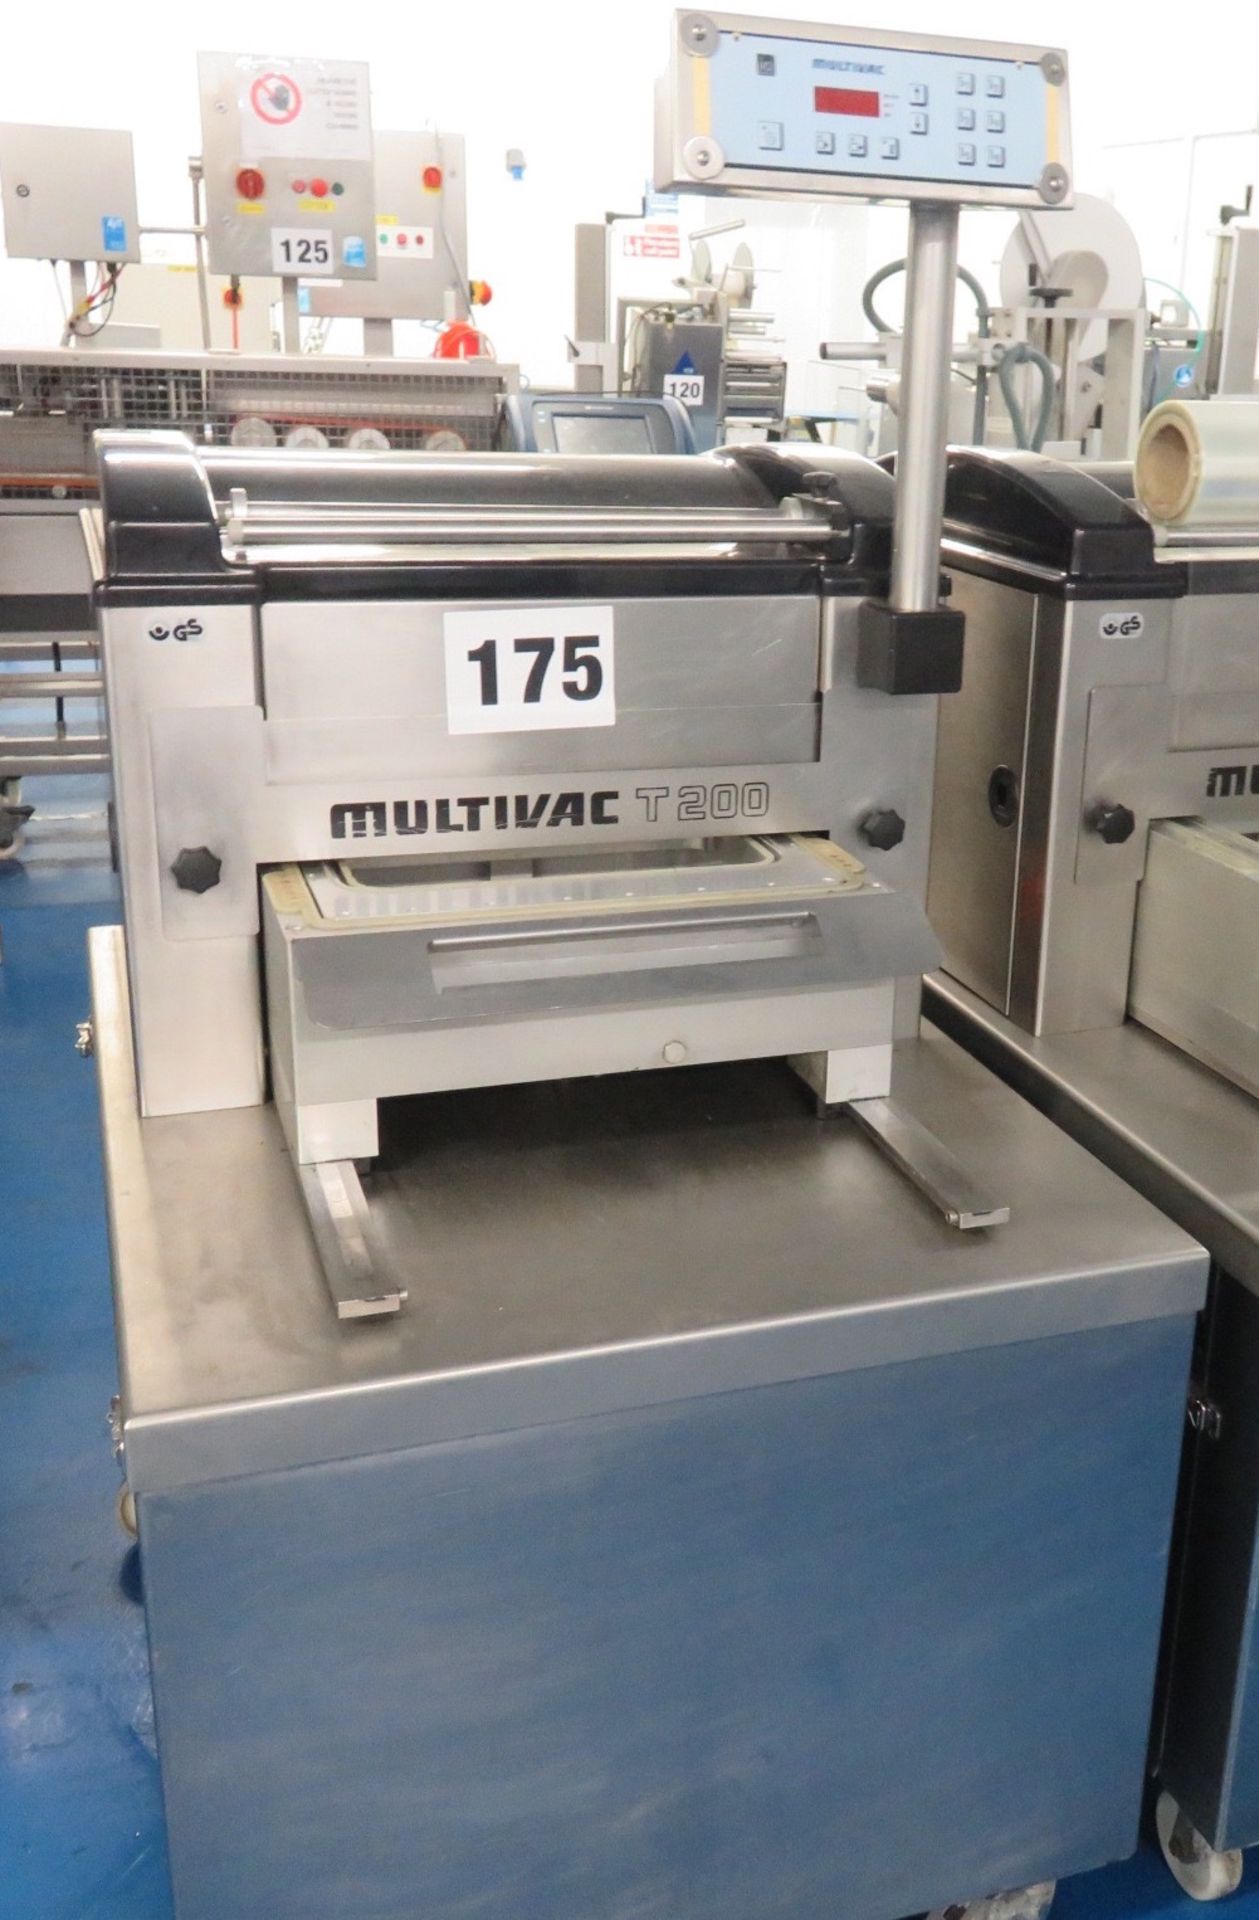 Multivac T200 Tray Sealing machine. Die size approx 345 x 190mm. LO £40